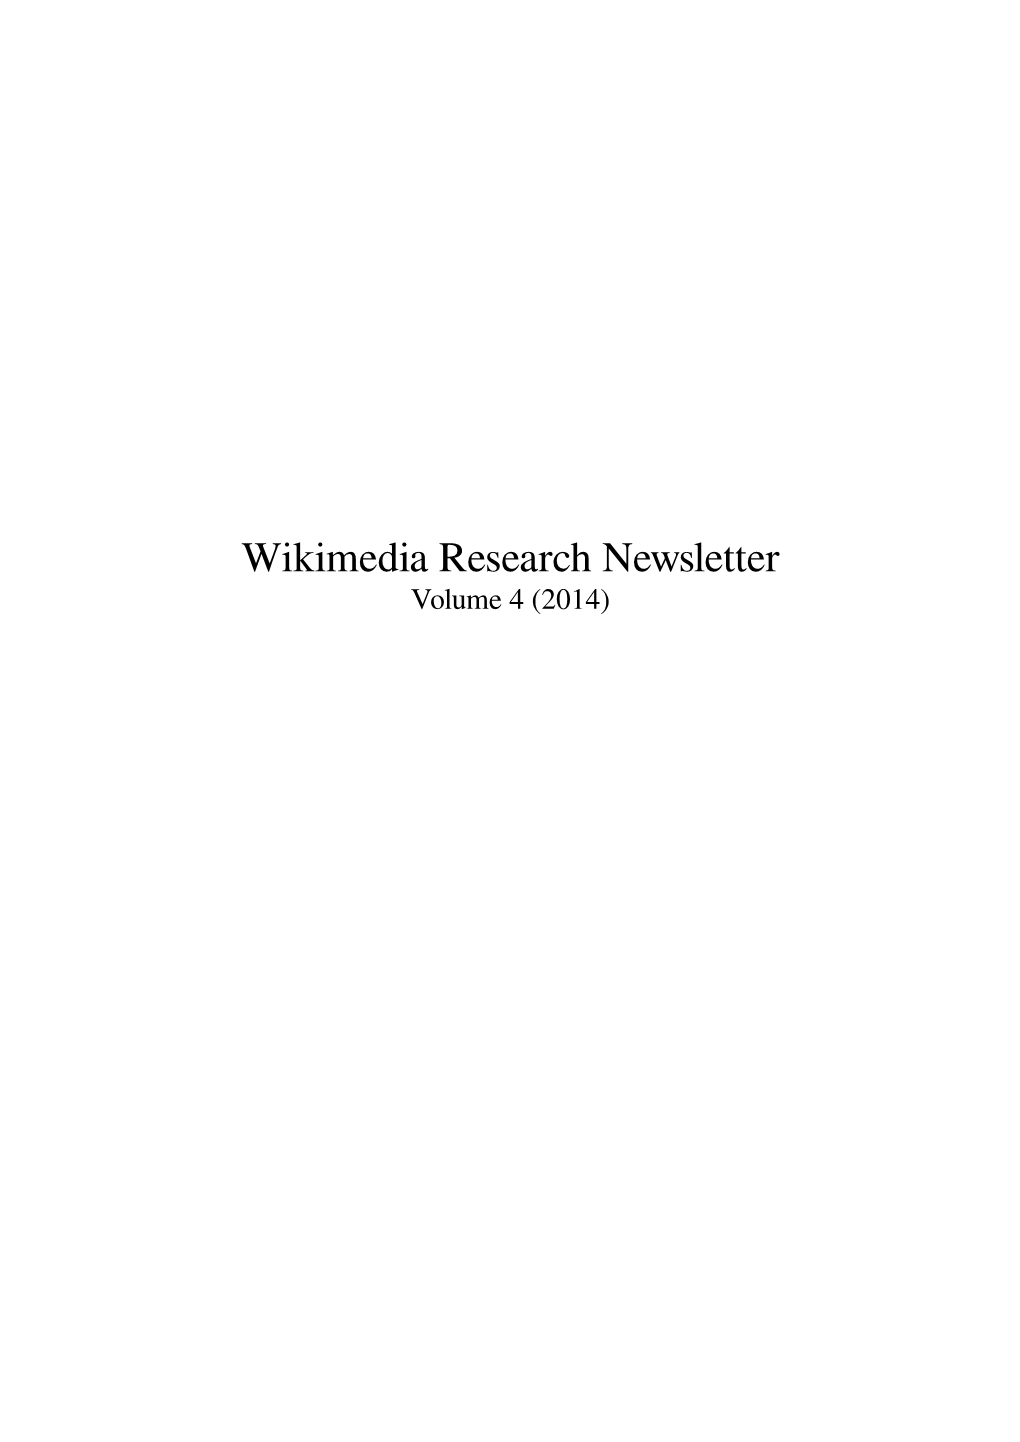 Wikimedia Research Newsletter Volume 4 (2014) Contents